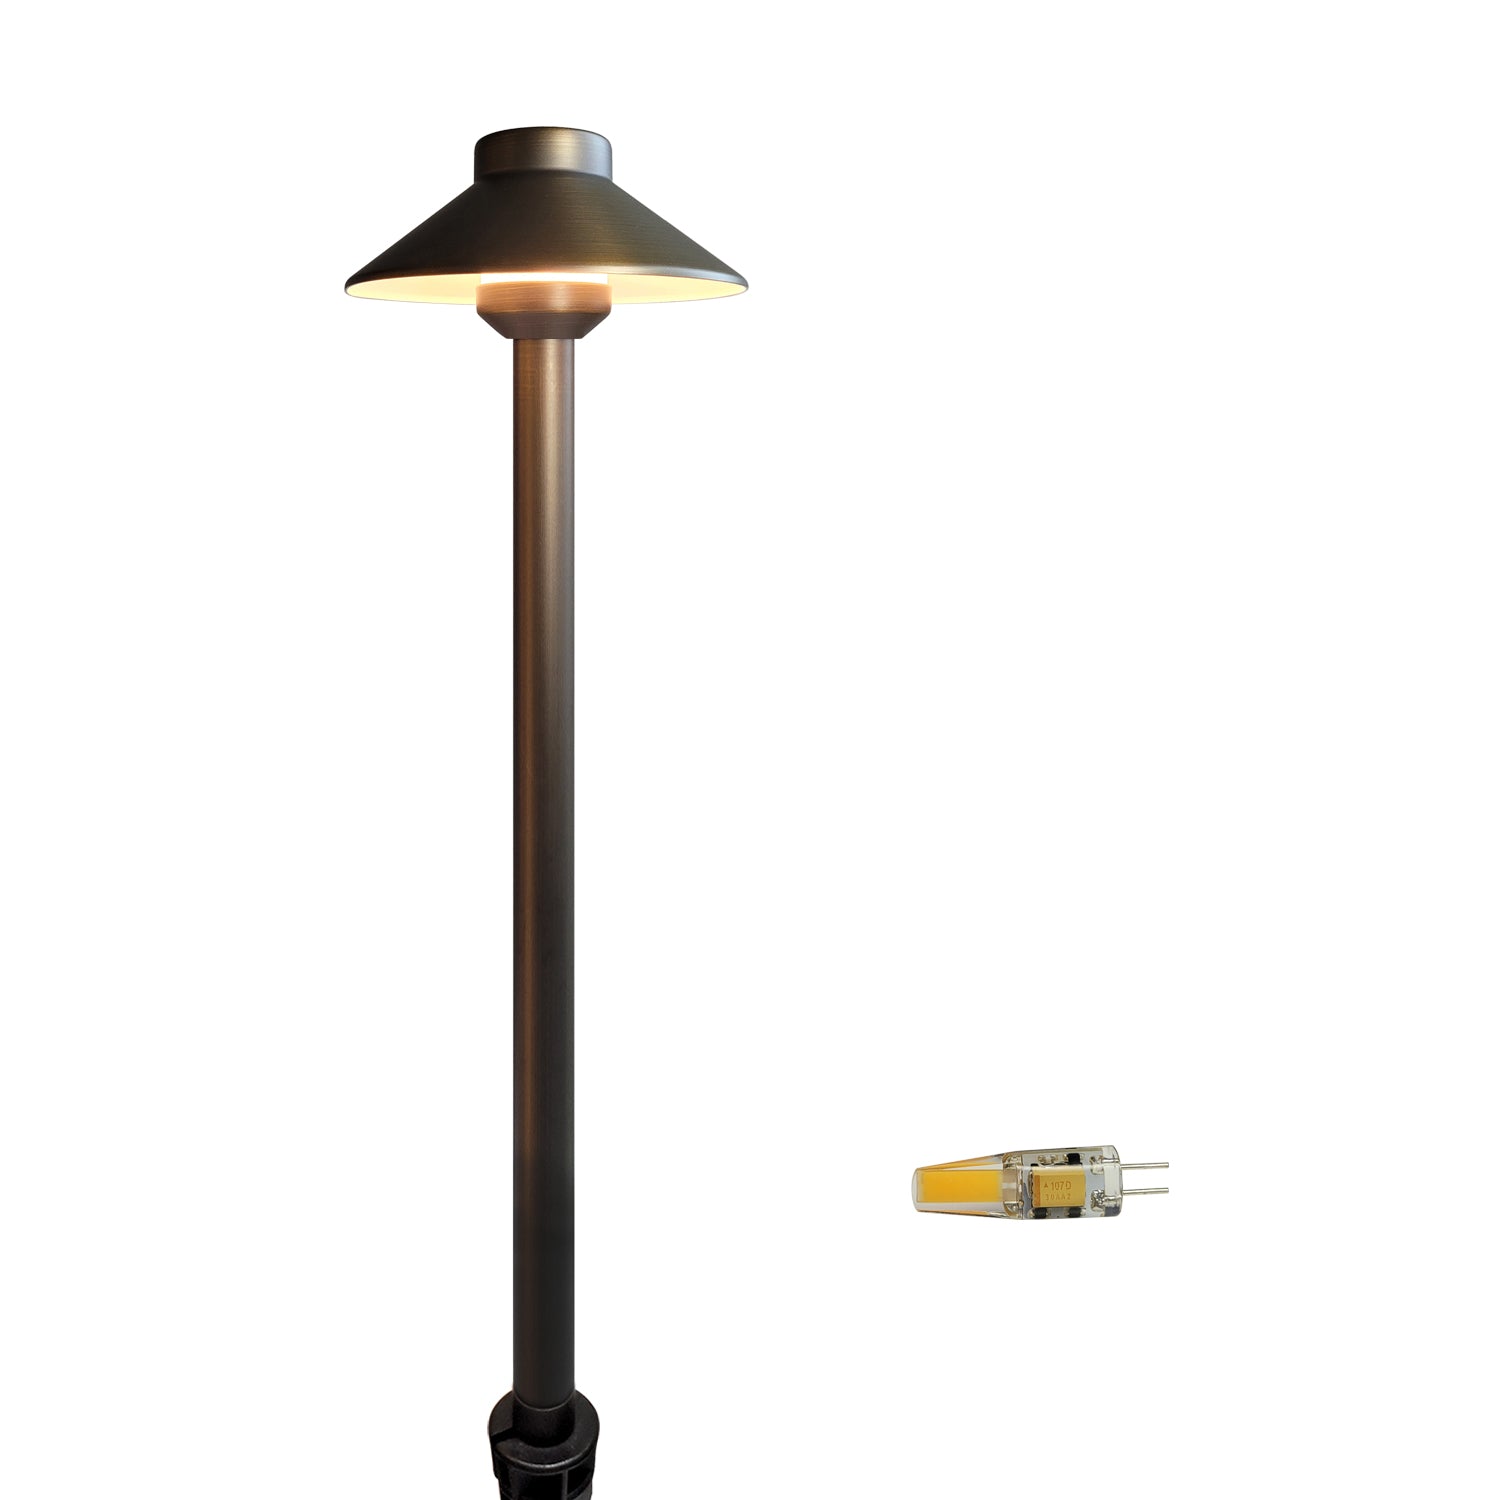 Copper 12V low voltage garden pathway light with brass outdoor decor lighting feature, model COP602B.